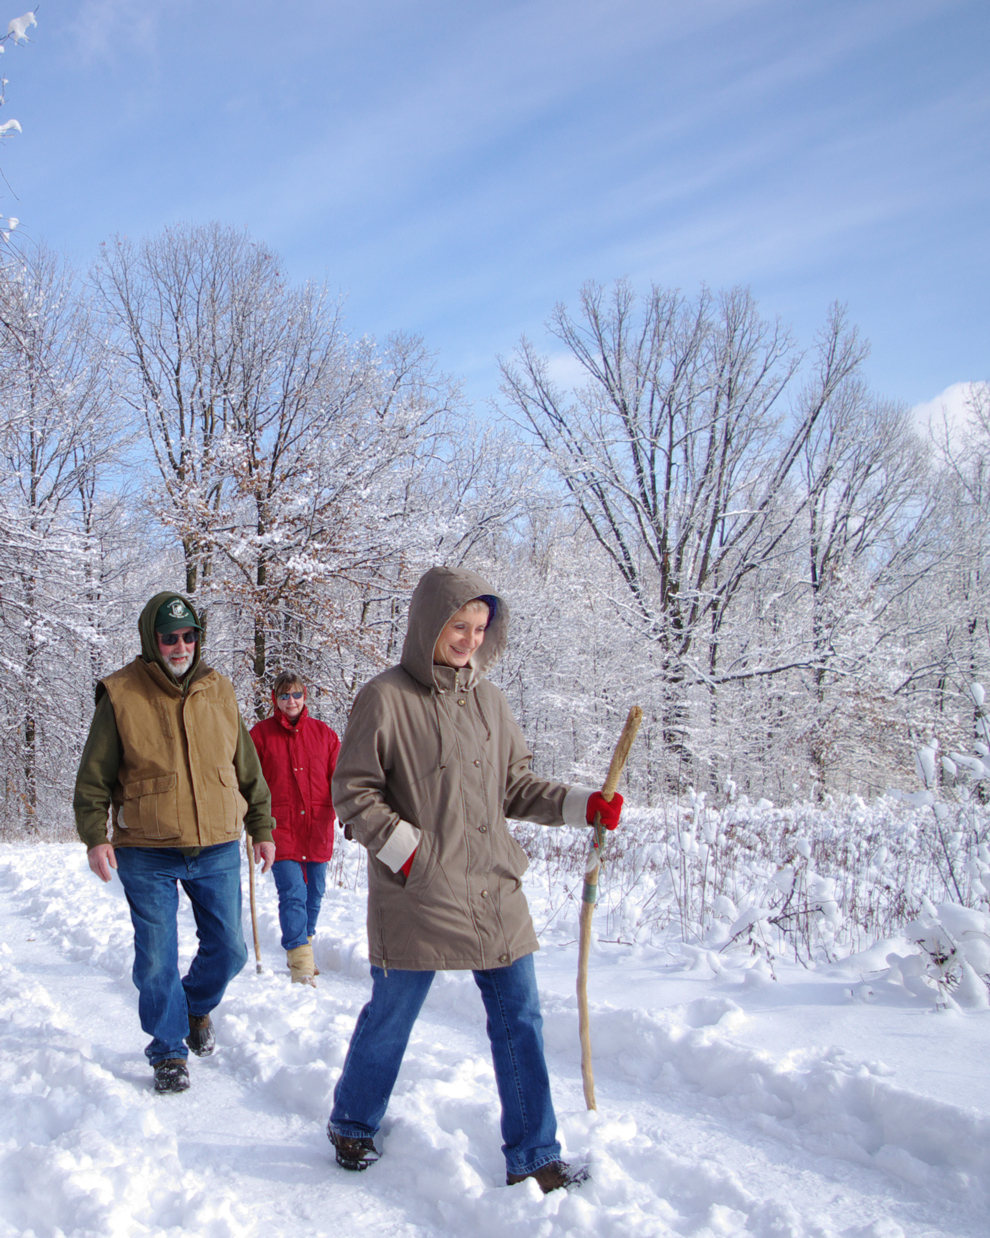 Three hikers walk along a snowy trail at Blendon Woods